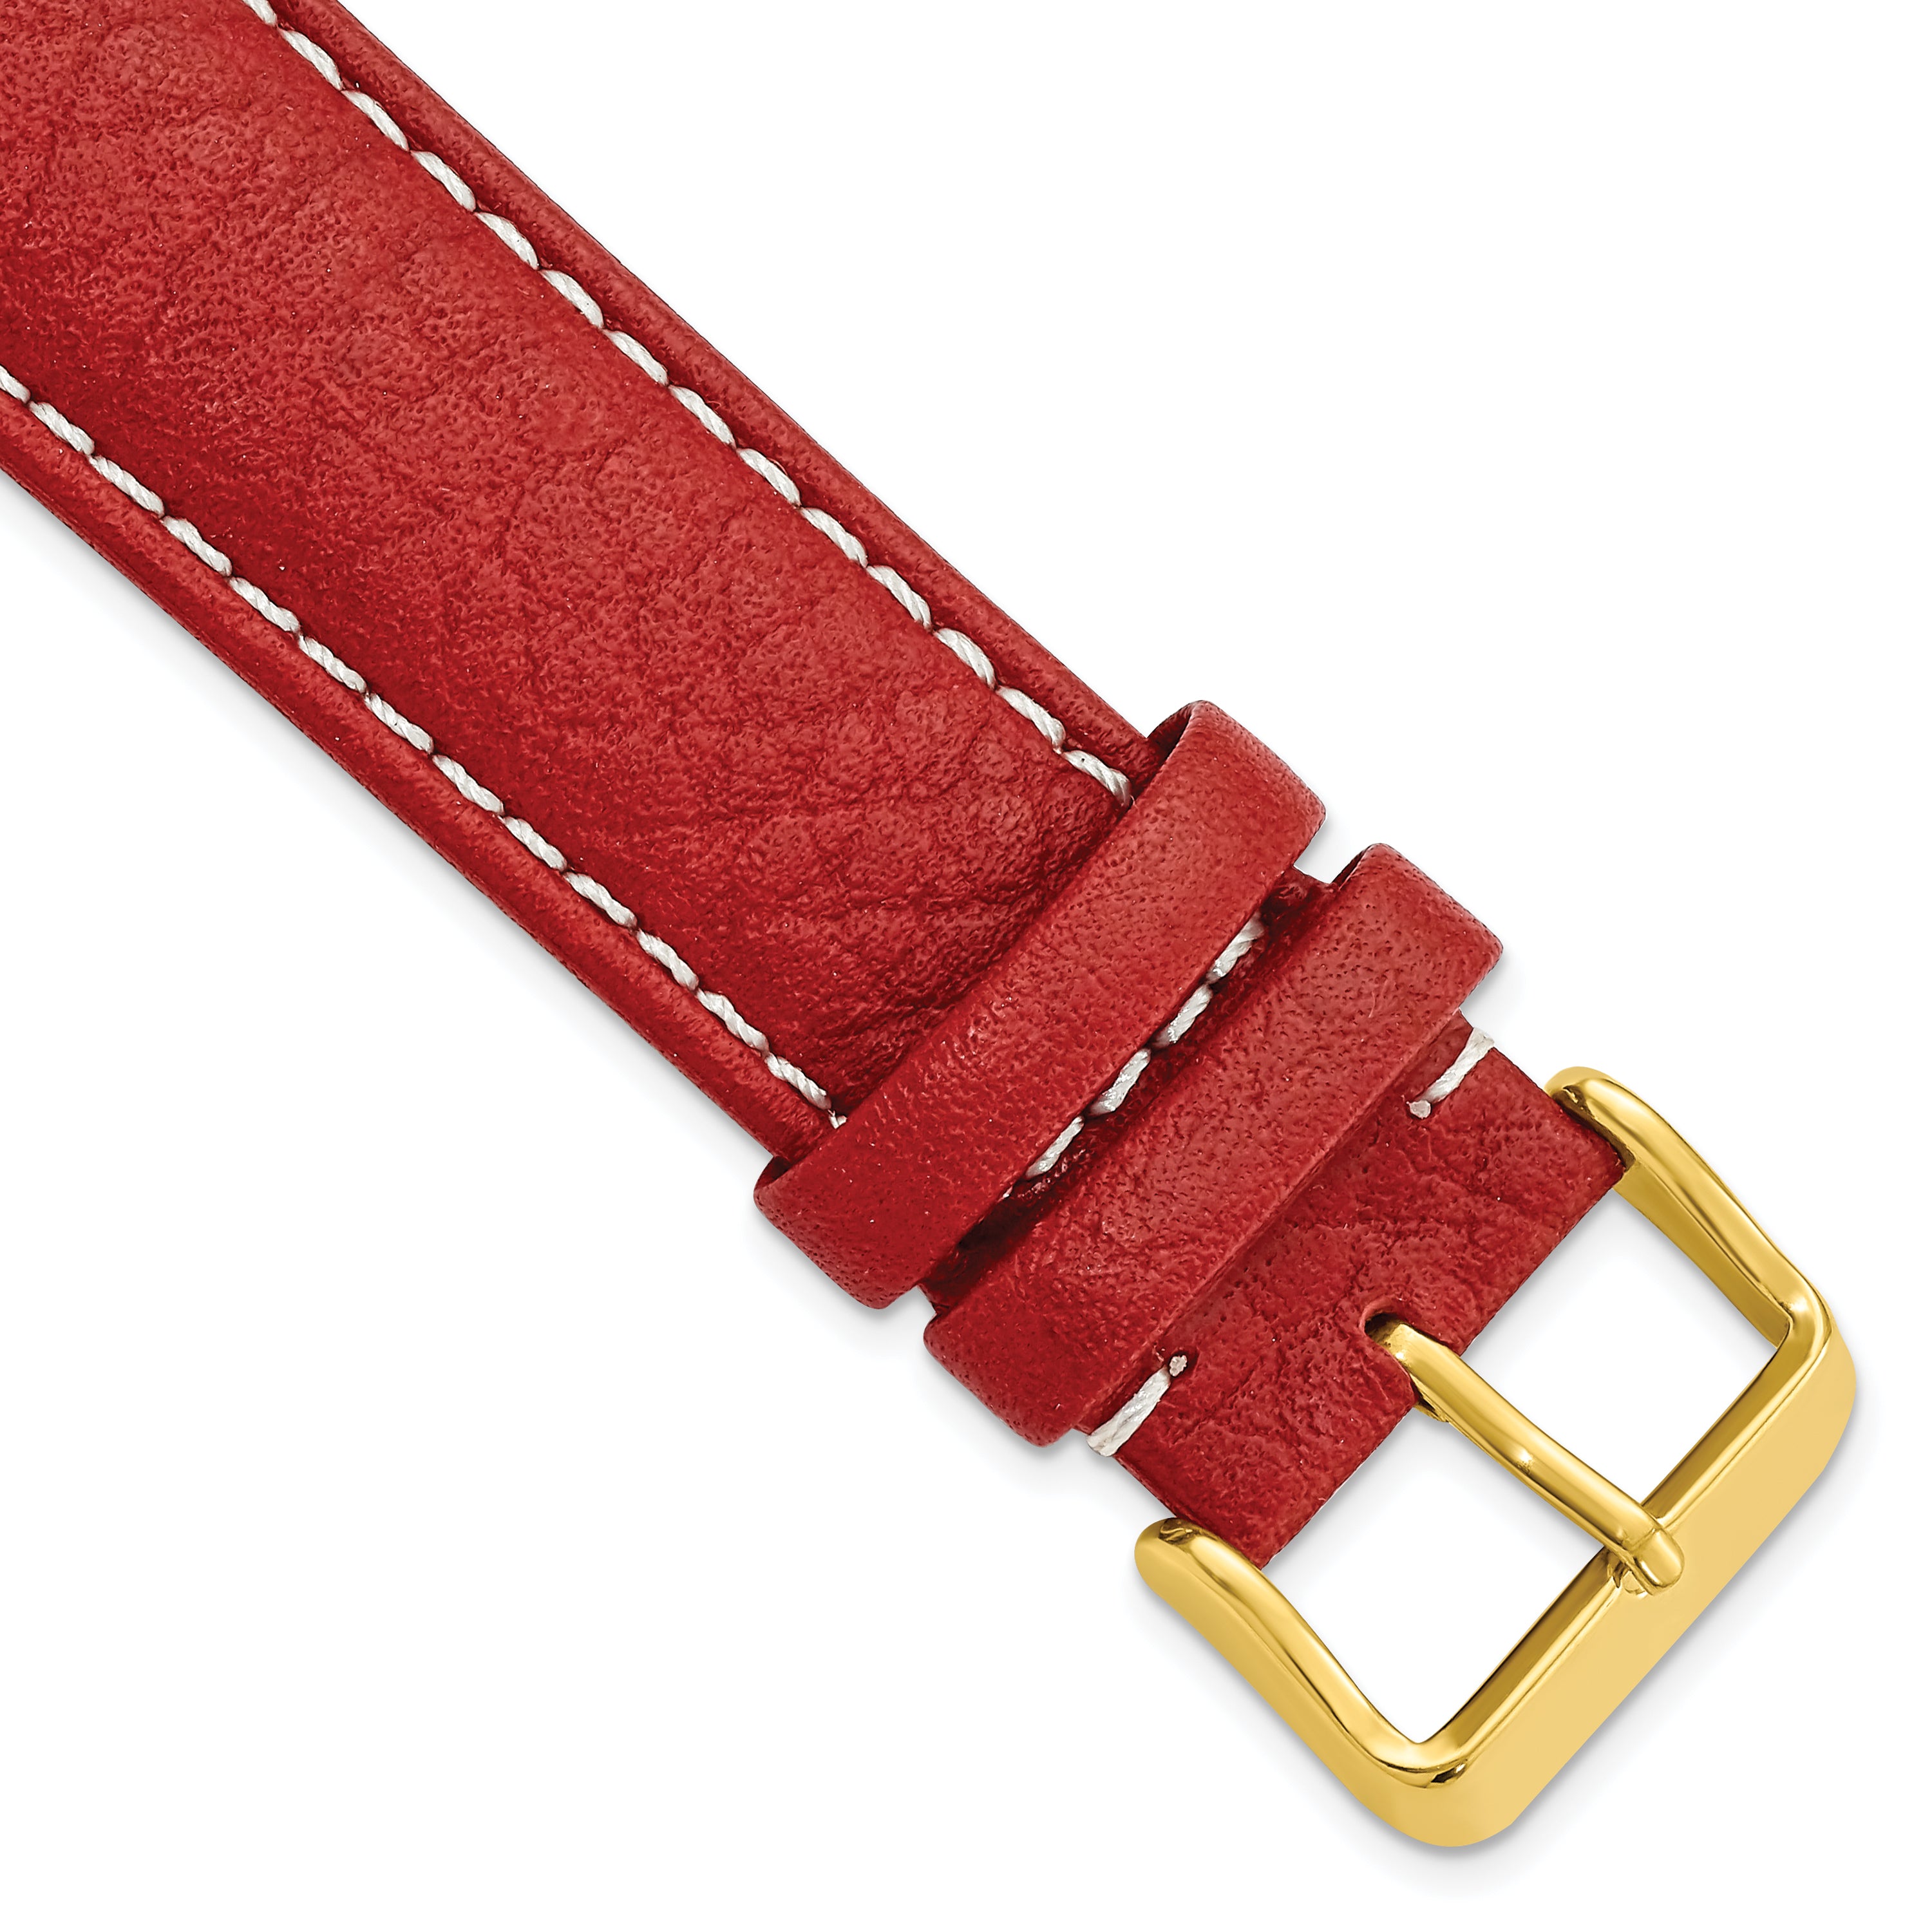 DeBeer 24mm Red Sport Leather with White Stitching and Gold-tone Buckle 7.5 inch Watch Band